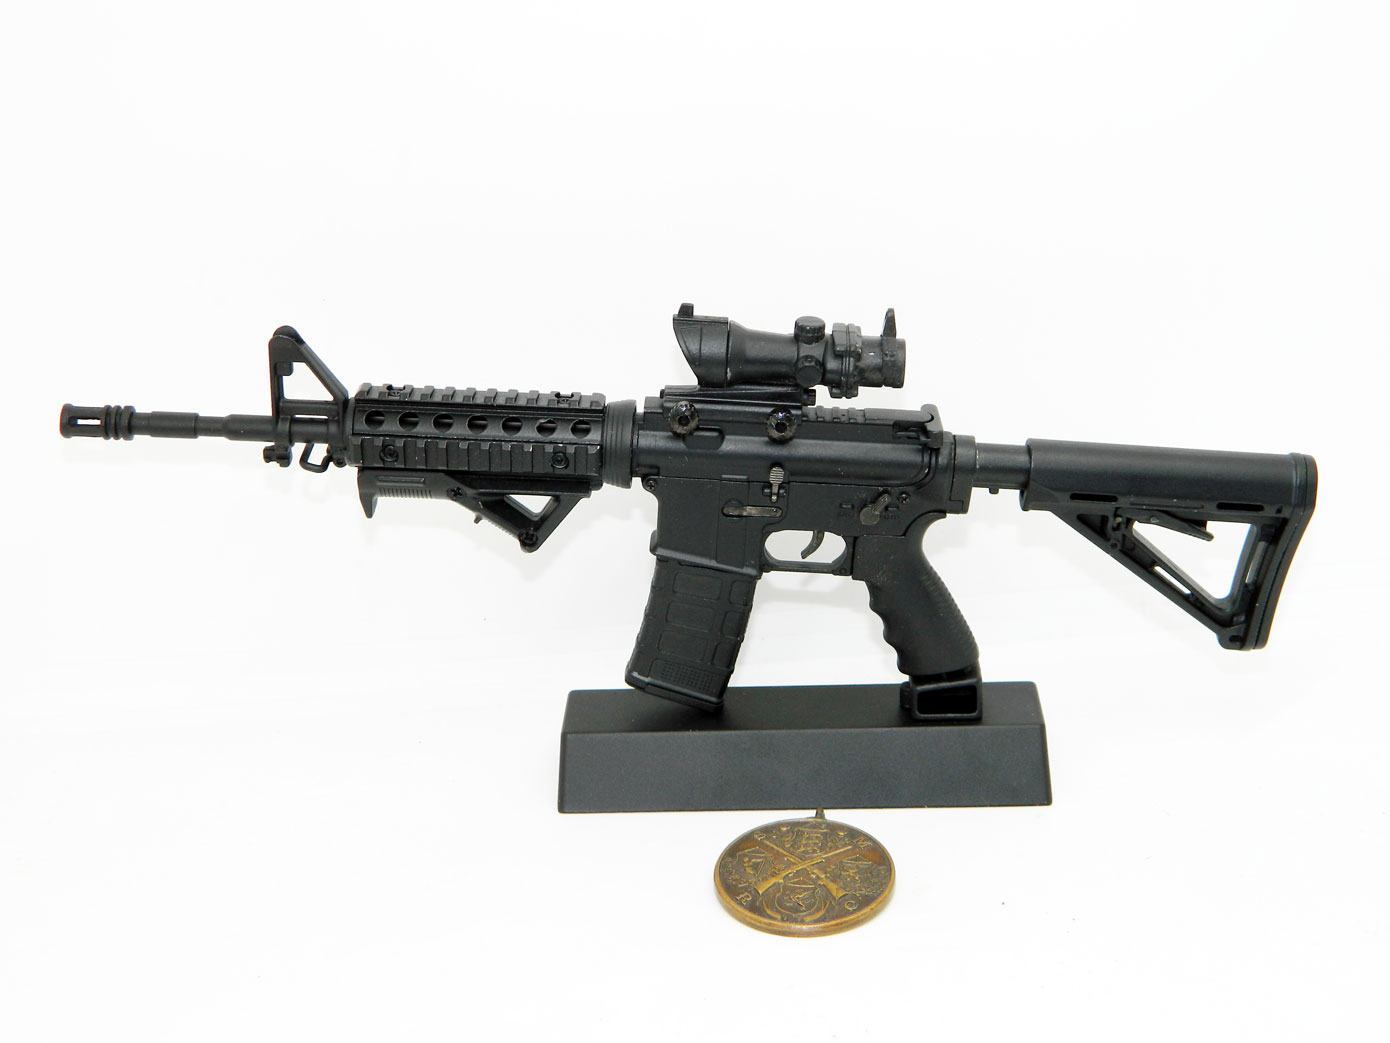 Model Colt M4A1 tactical automatic rifle on a scale of 1:4